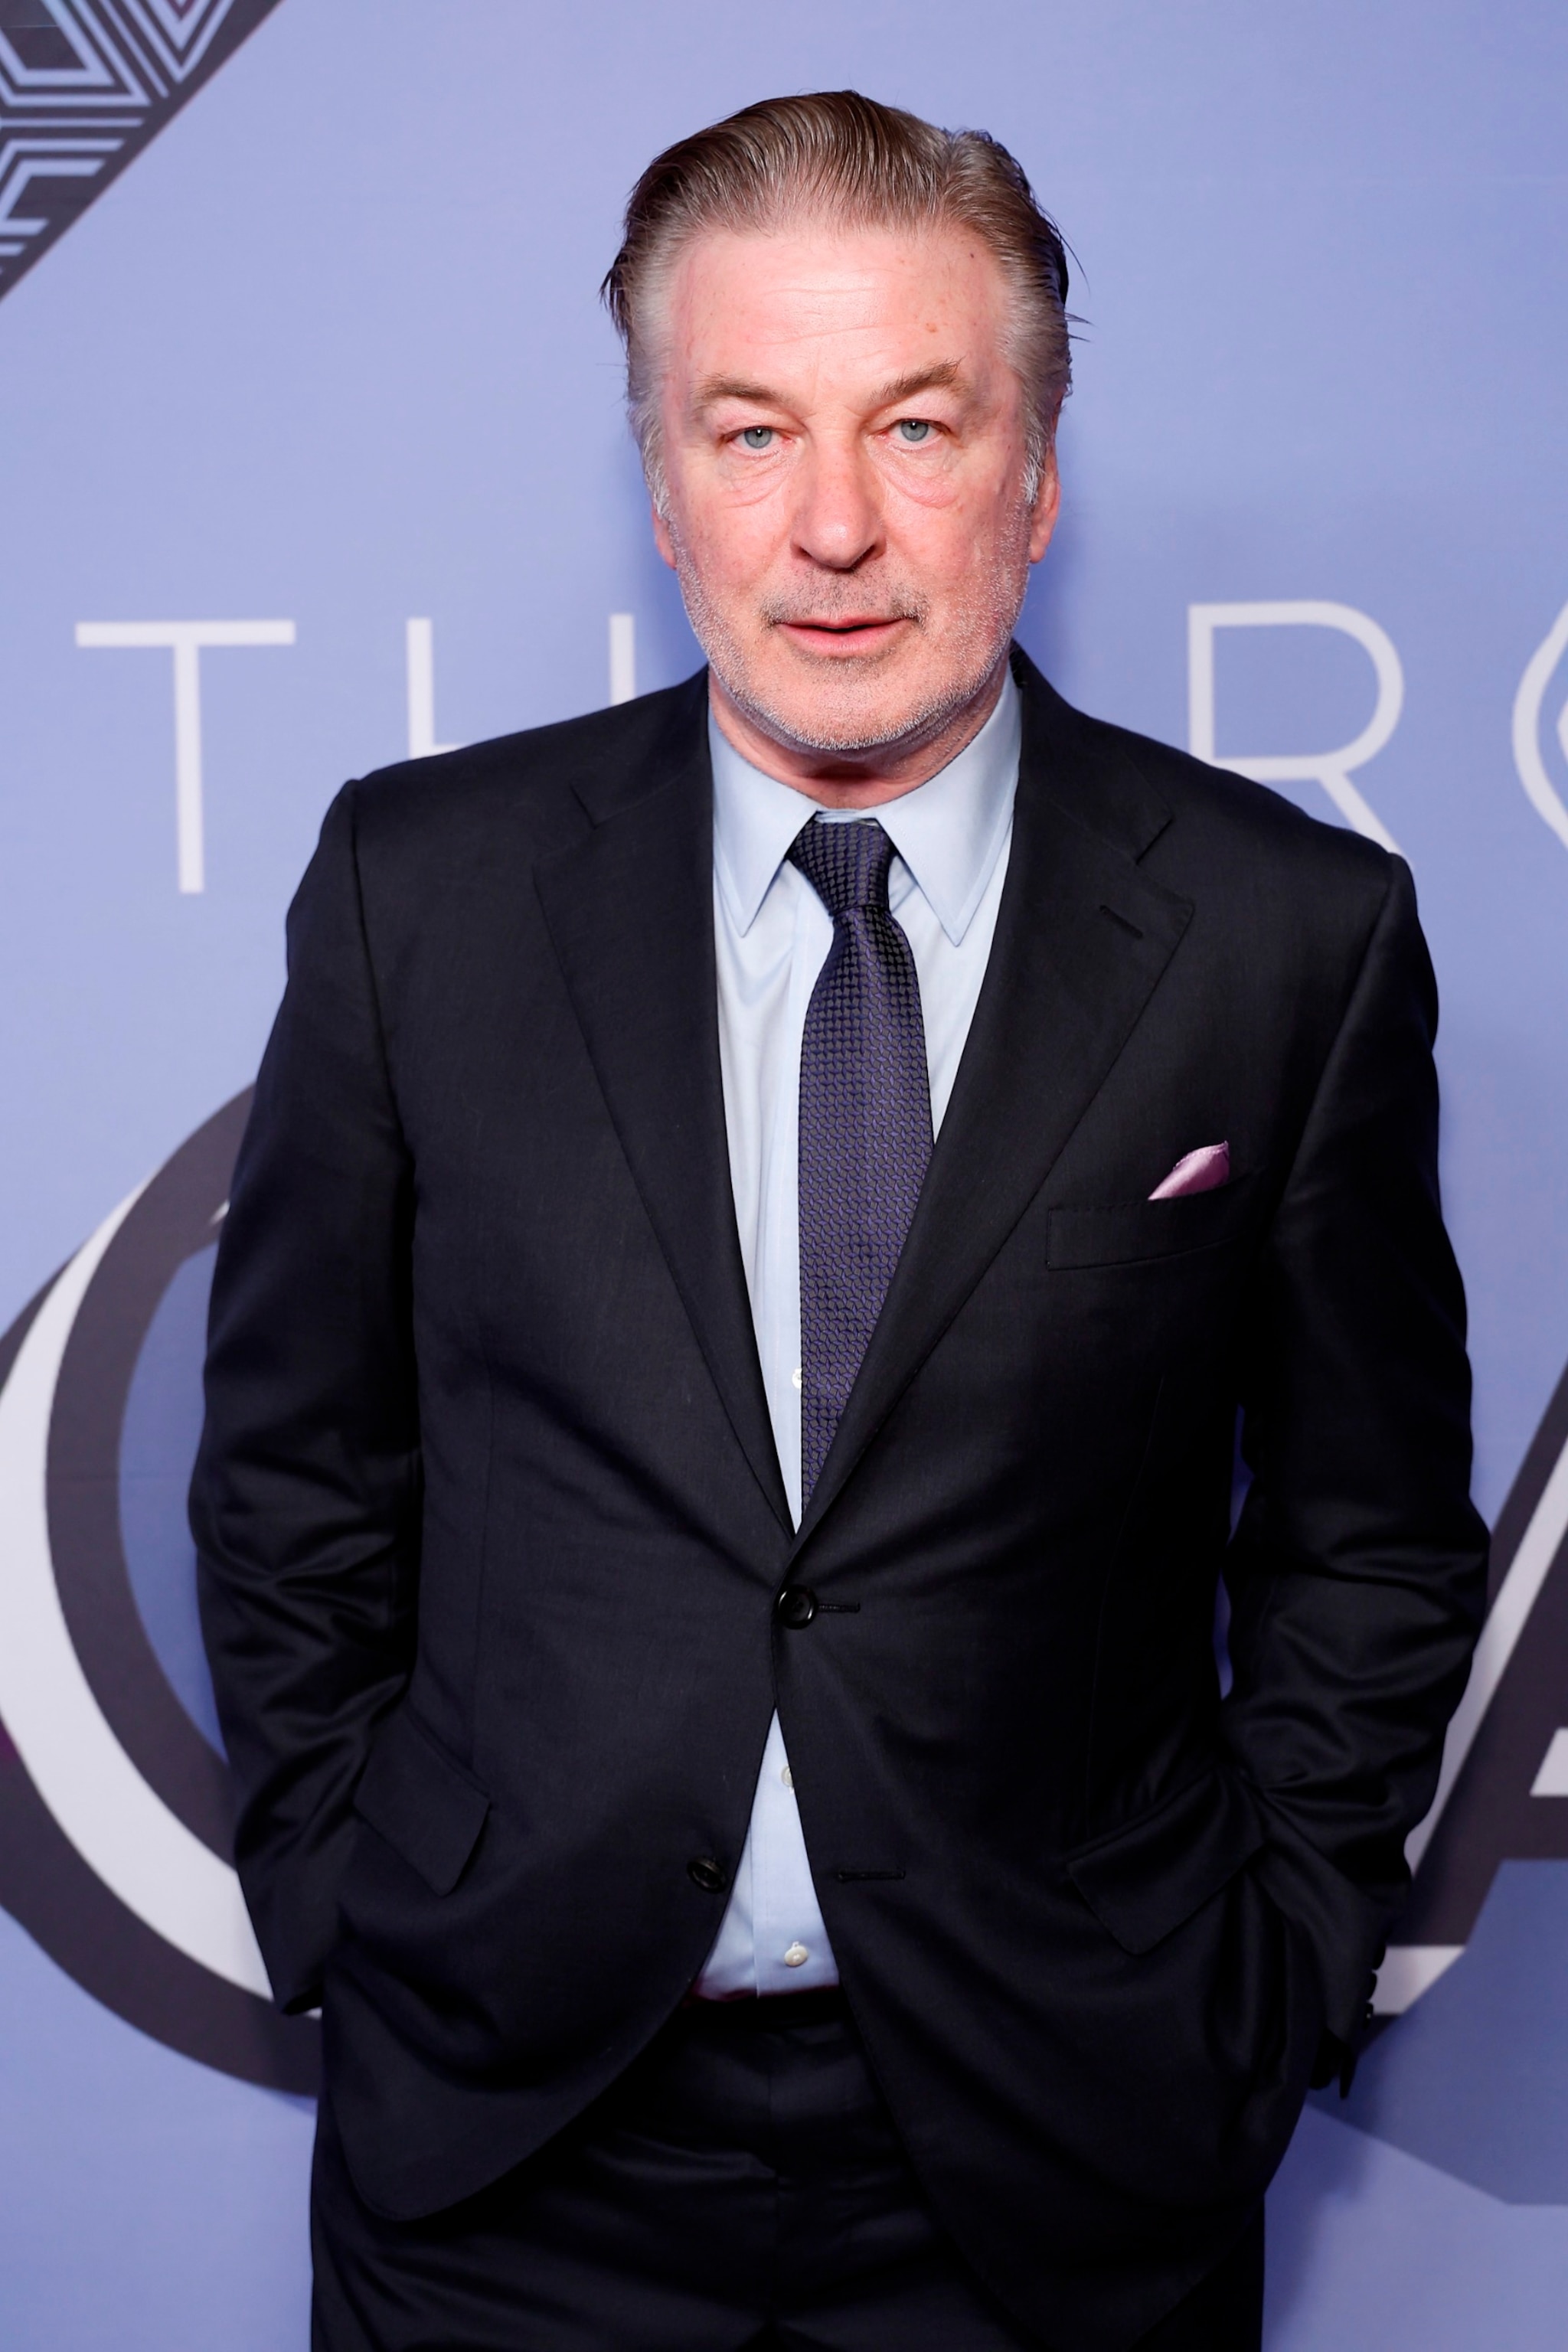 PHOTO: Alec Baldwin attends The Roundabout Gala 2023 at The Ziegfeld Ballroom in New York City, March 6, 2023.